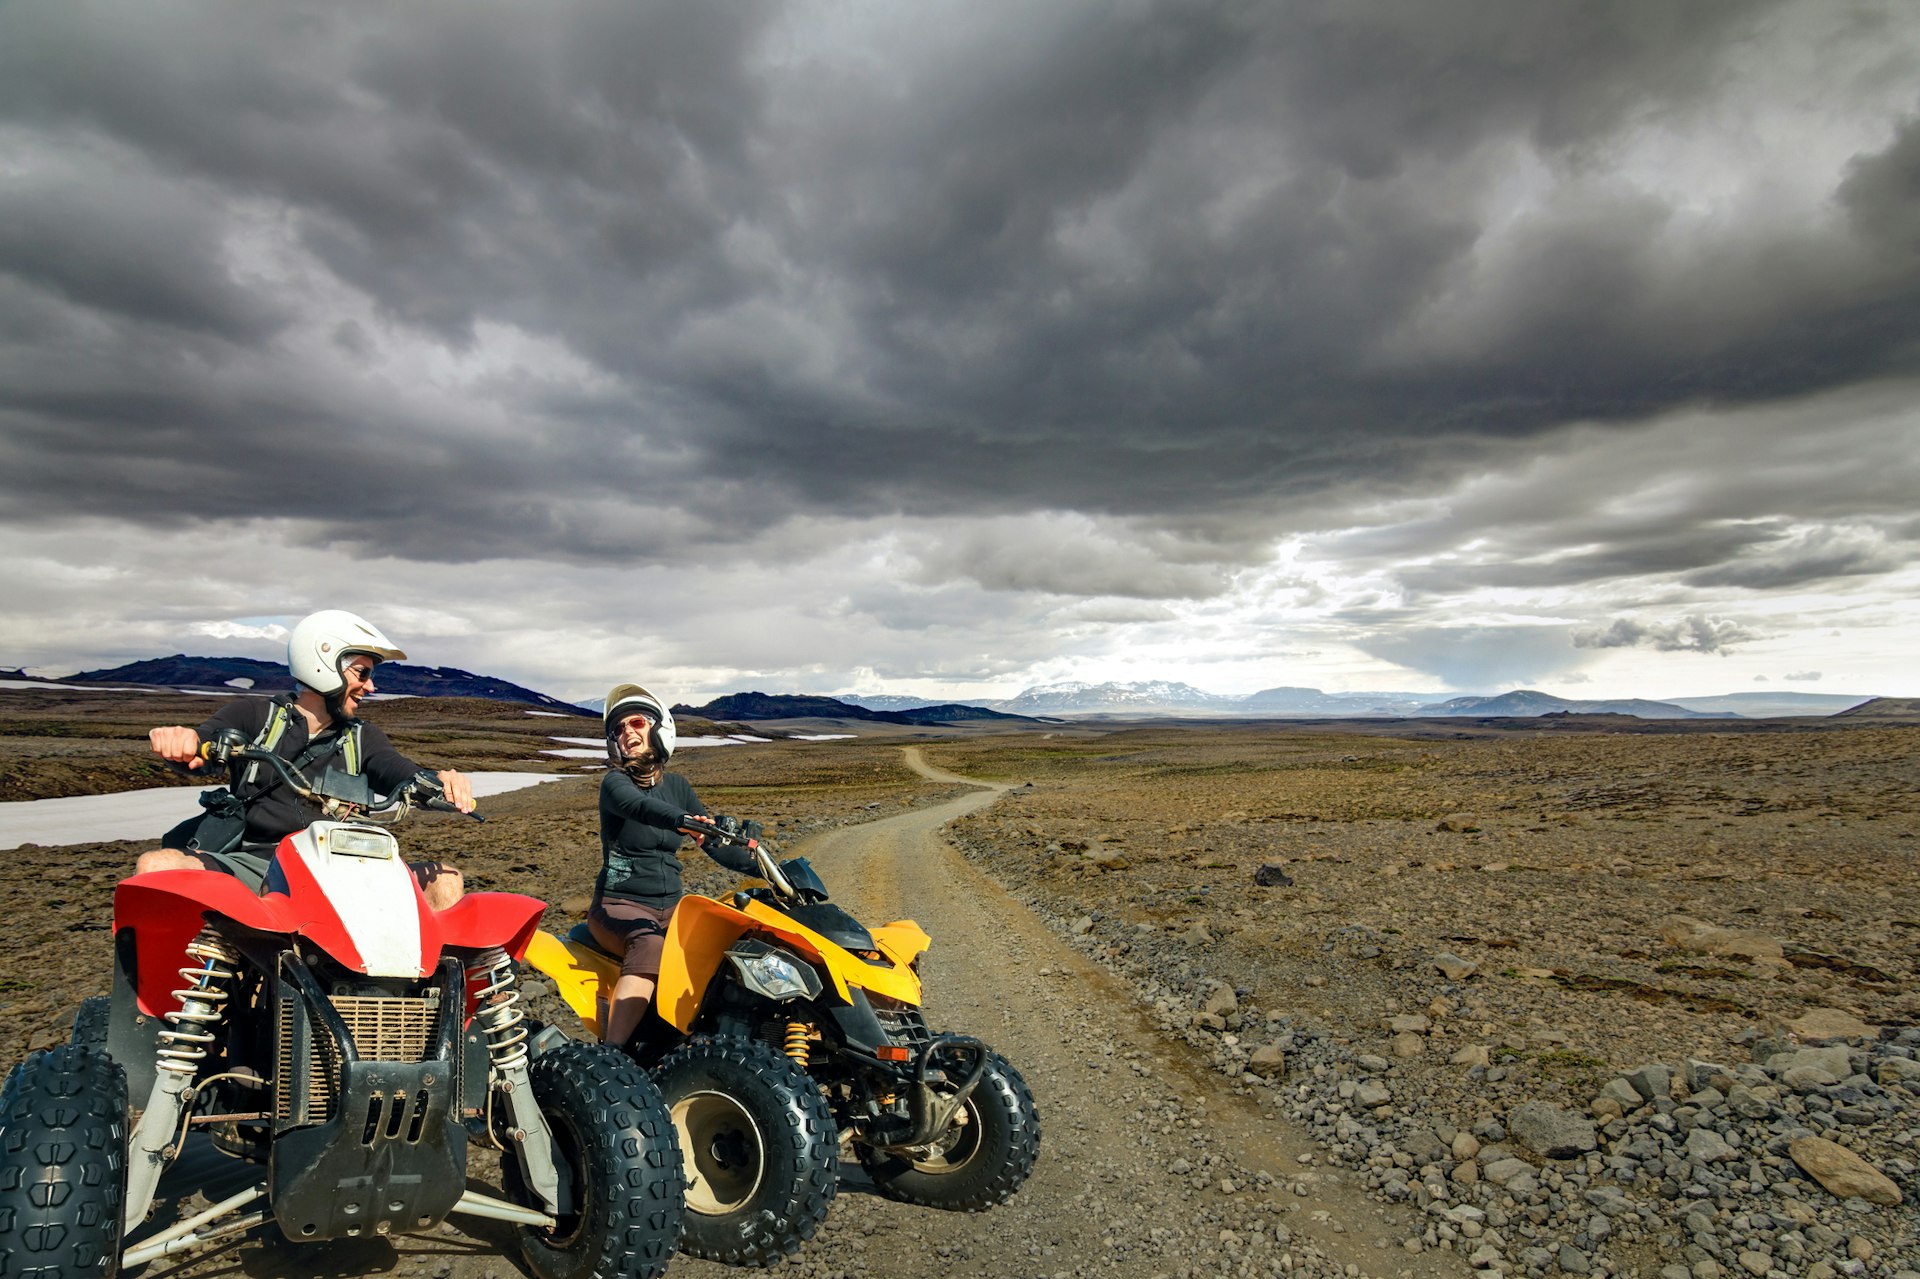 Laughing young couple ATV quad bikers smile joyful, cheerful and driving in icelandic Highland Landscape with quadbikes on dirt road F550 in Kaldidalur, Iceland.